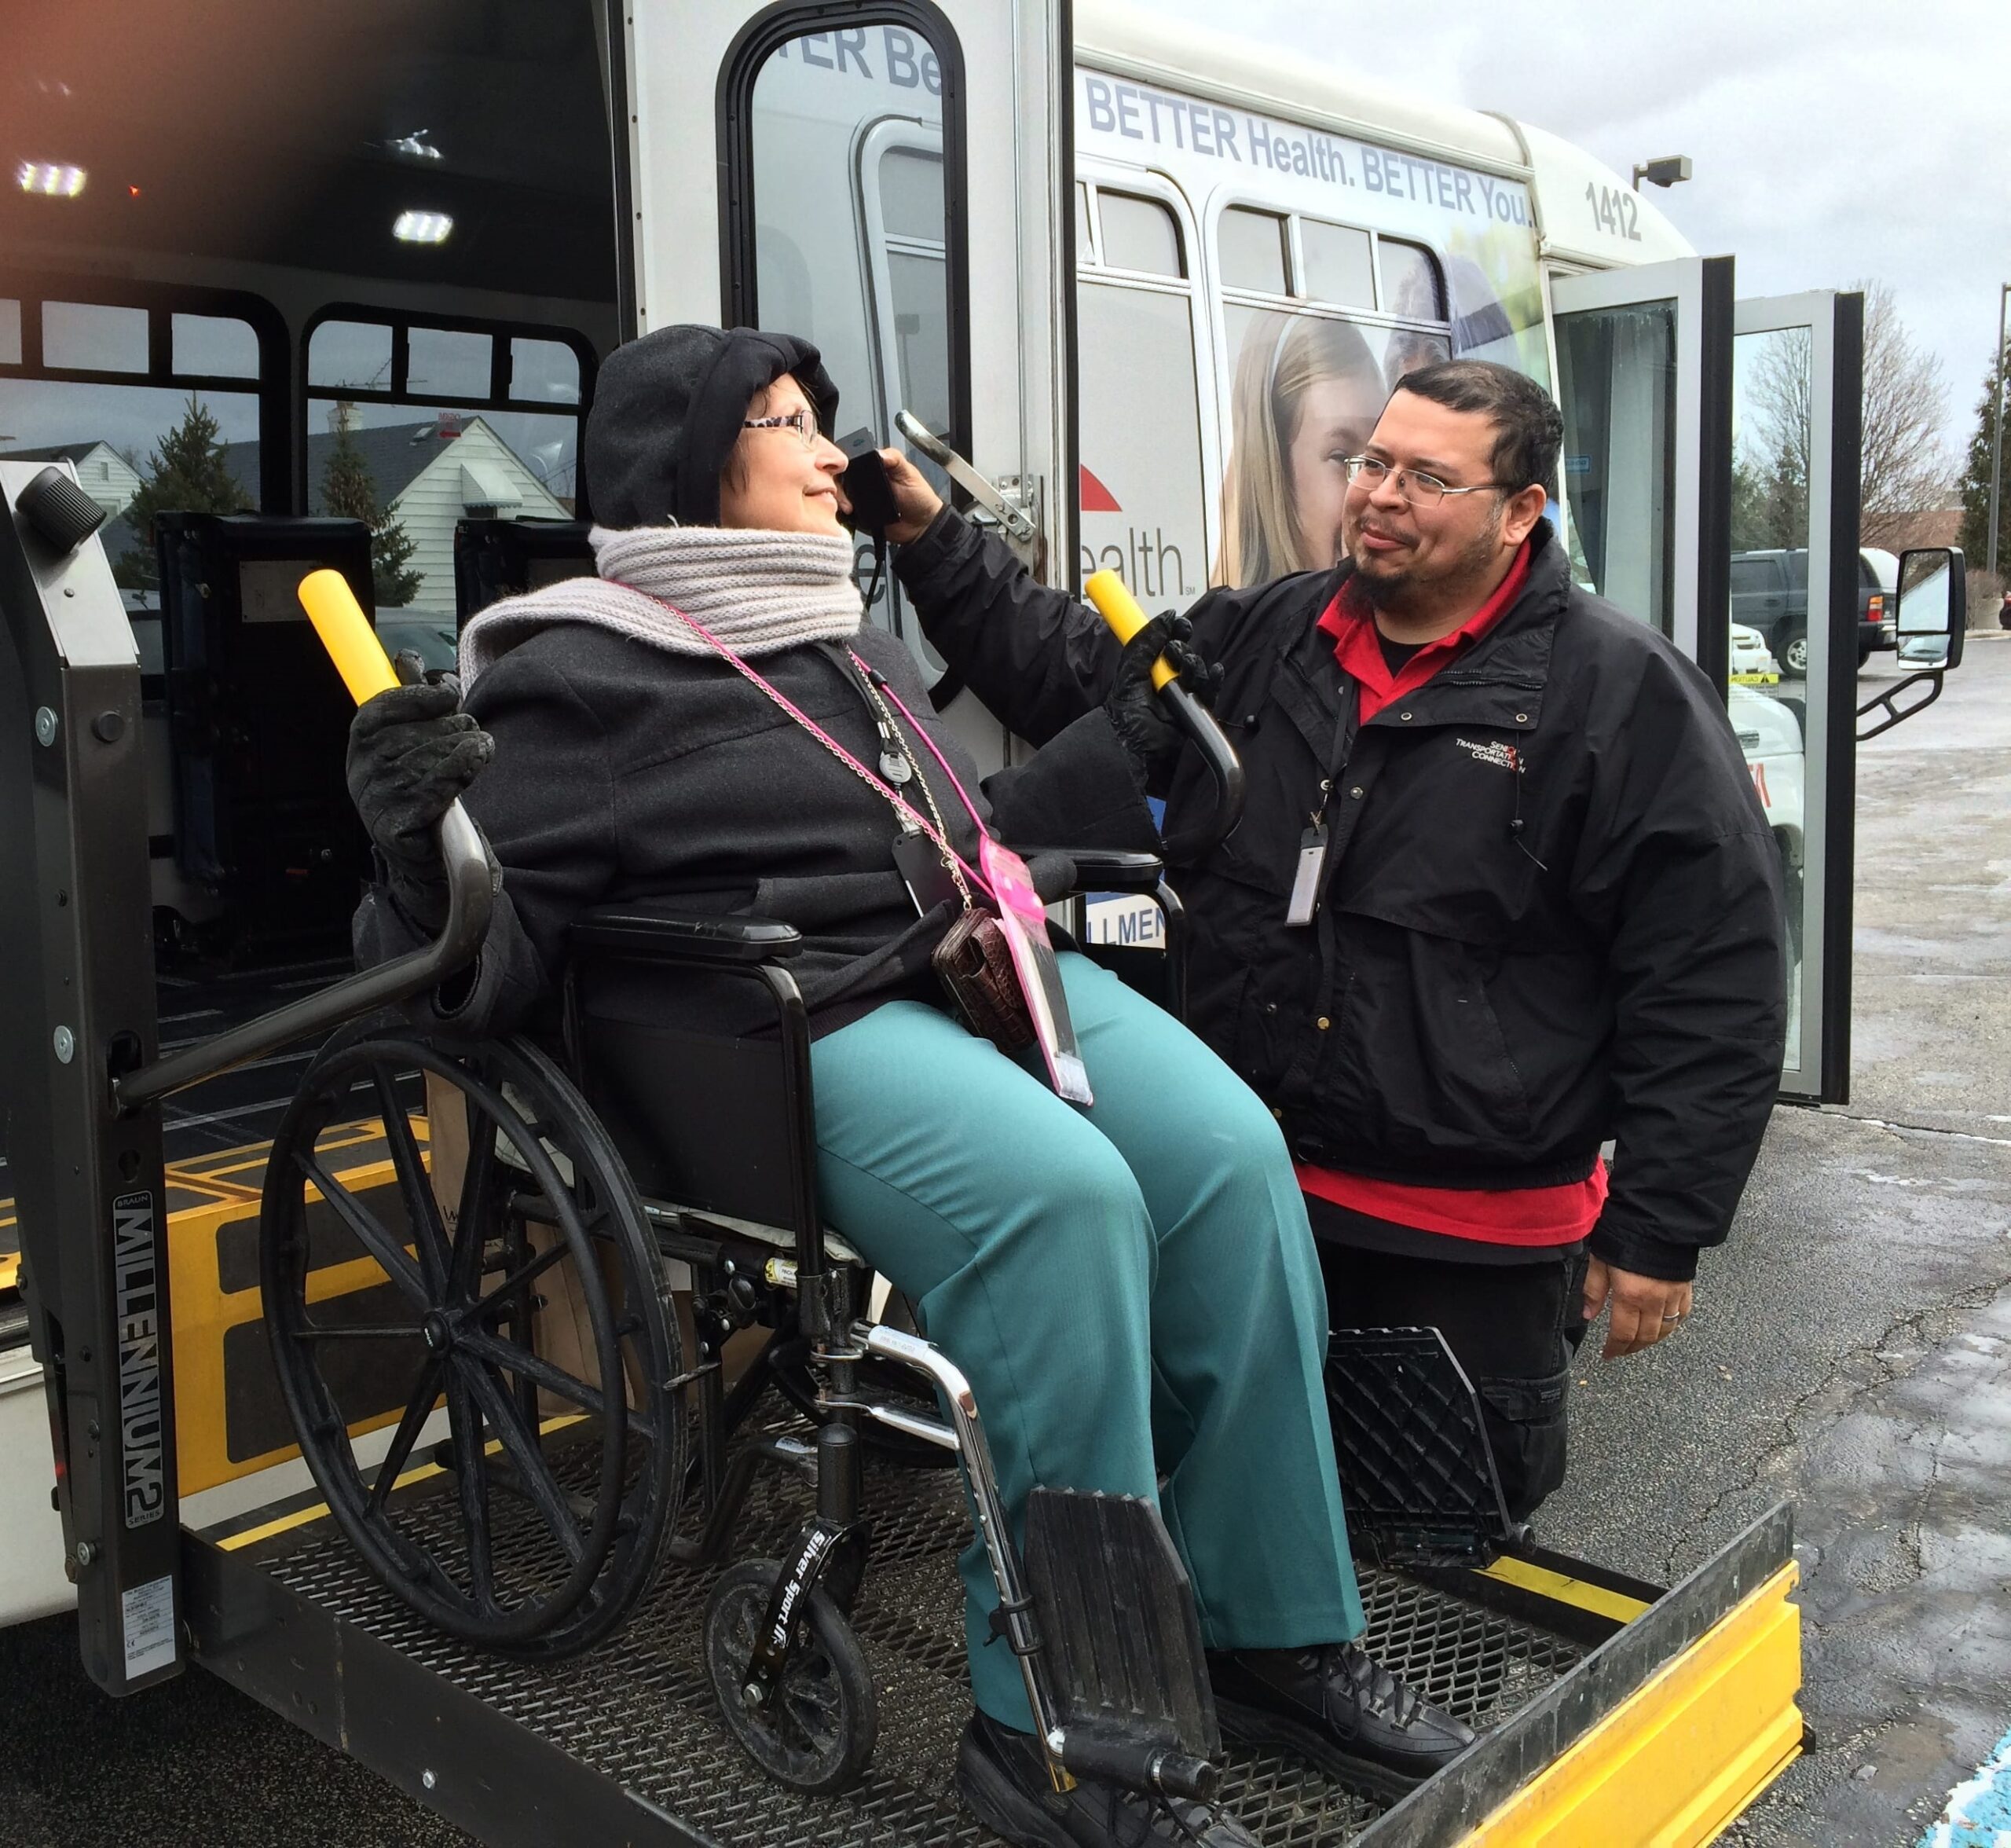 Driver assisting woman on wheelchair on lift